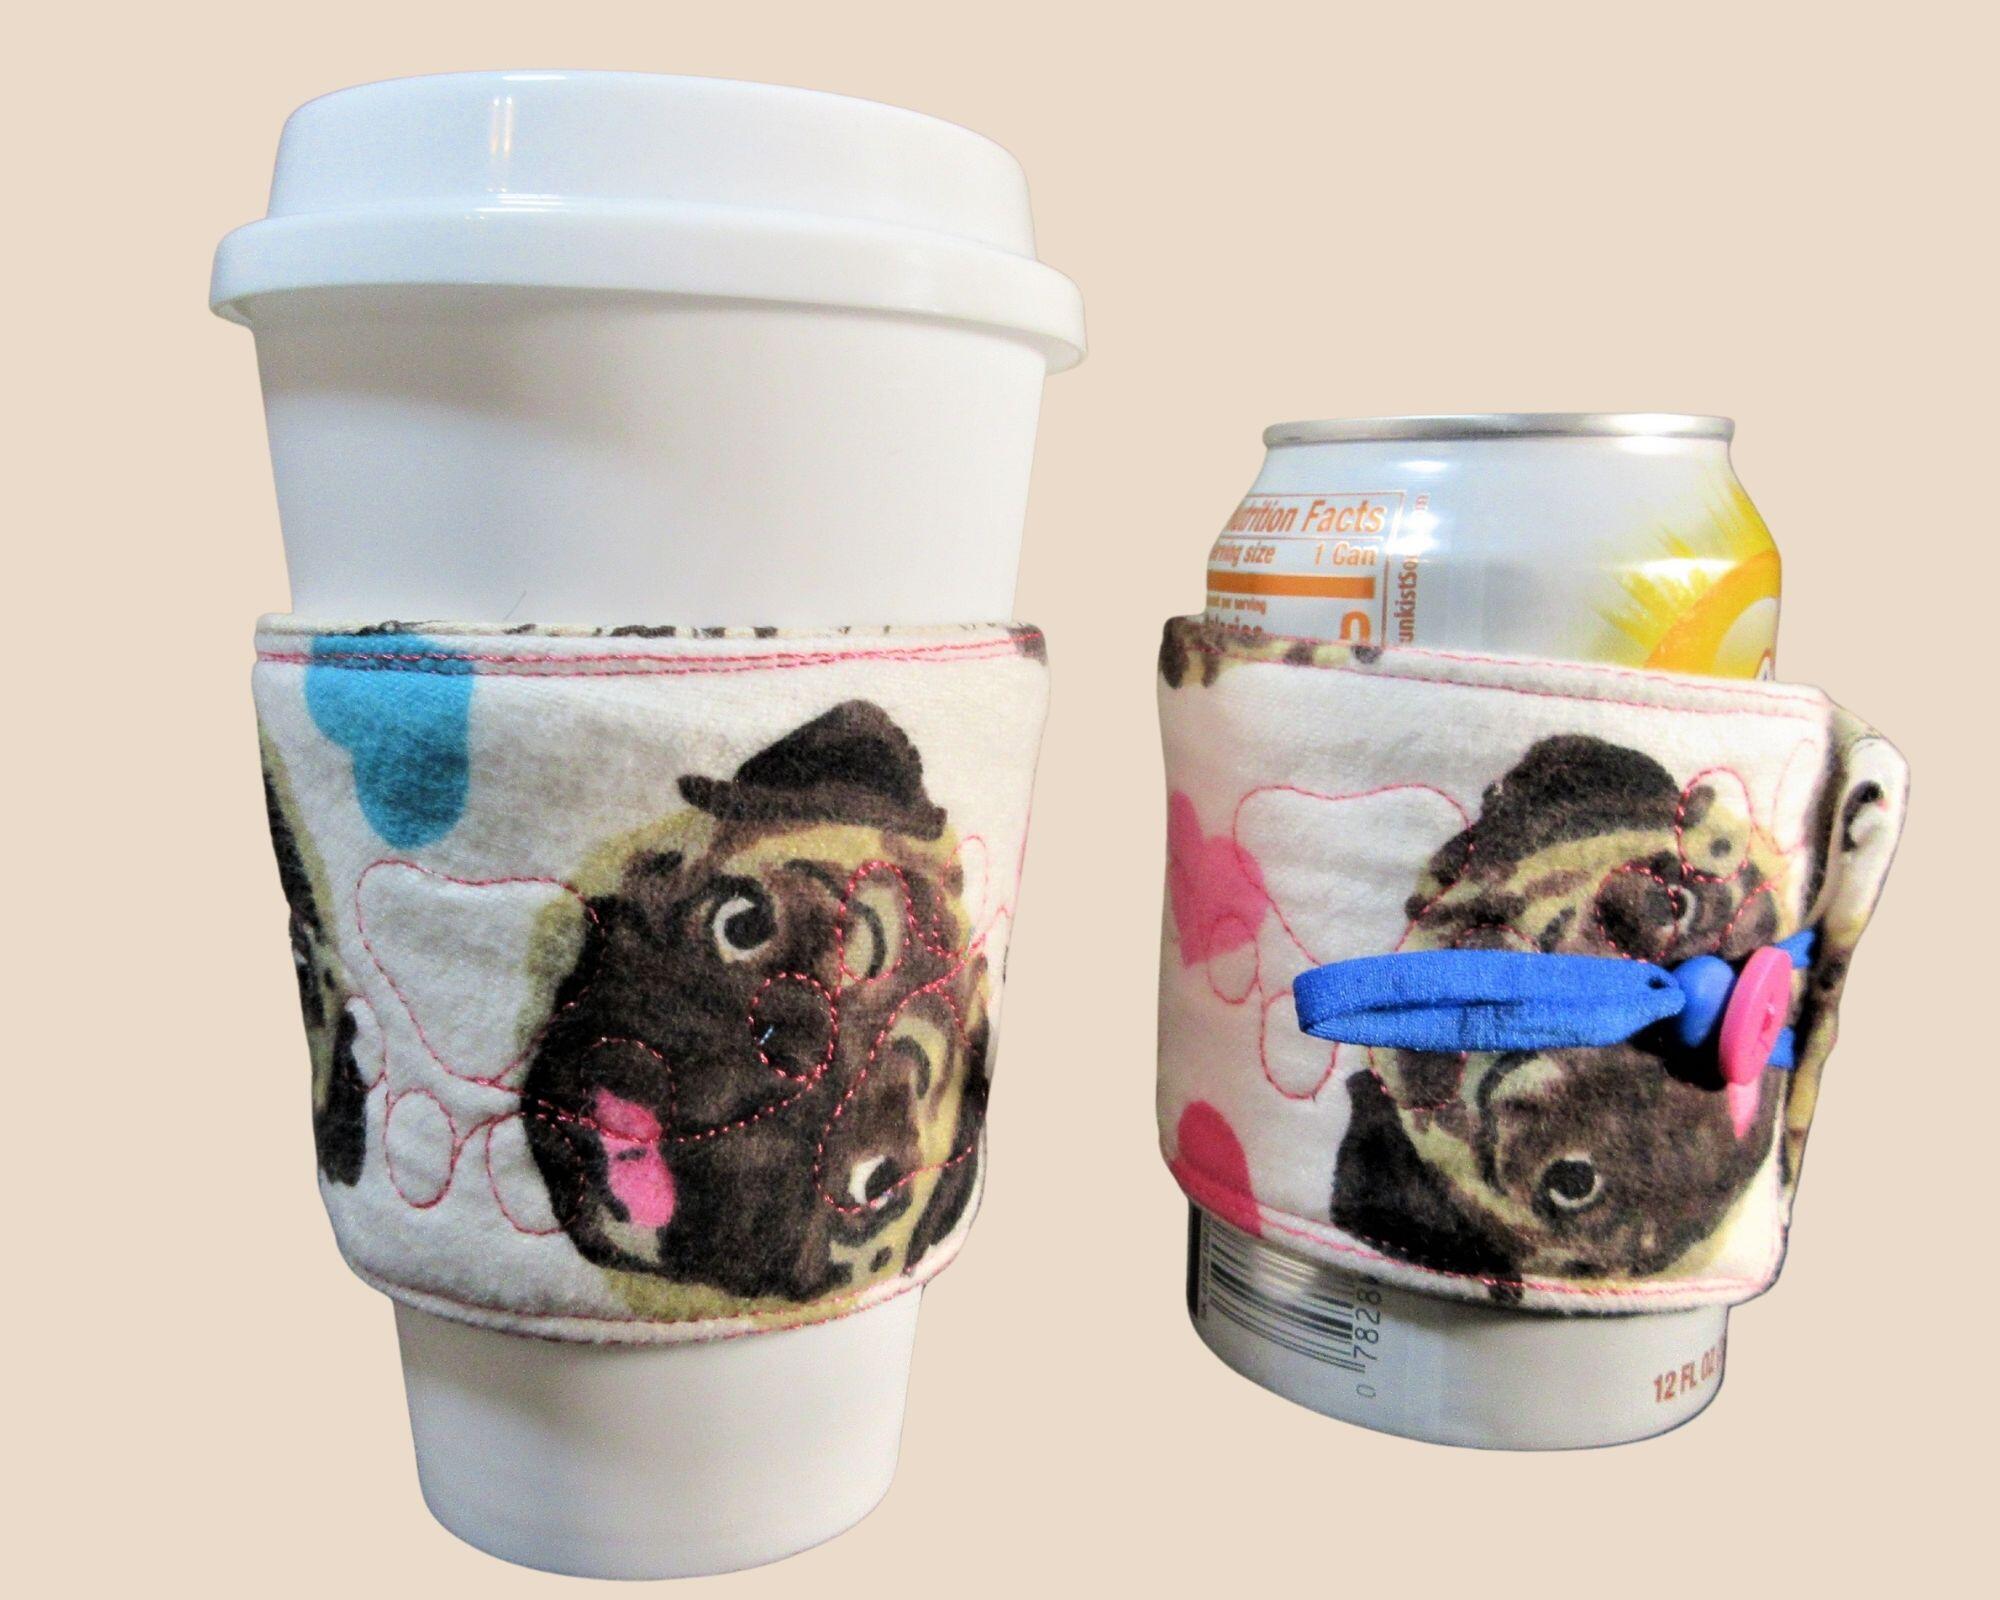 Pug Coffee Cup beverage sleeve.
Beverage Sleeve with Pug dog design and hearts and pink button closure

What makes it special

25% of sale to Georgia English Bulldog rescue #GEBR

Adjustable fit for most cup sizes

Use for hot or cold beverages

Quilted with paw prints